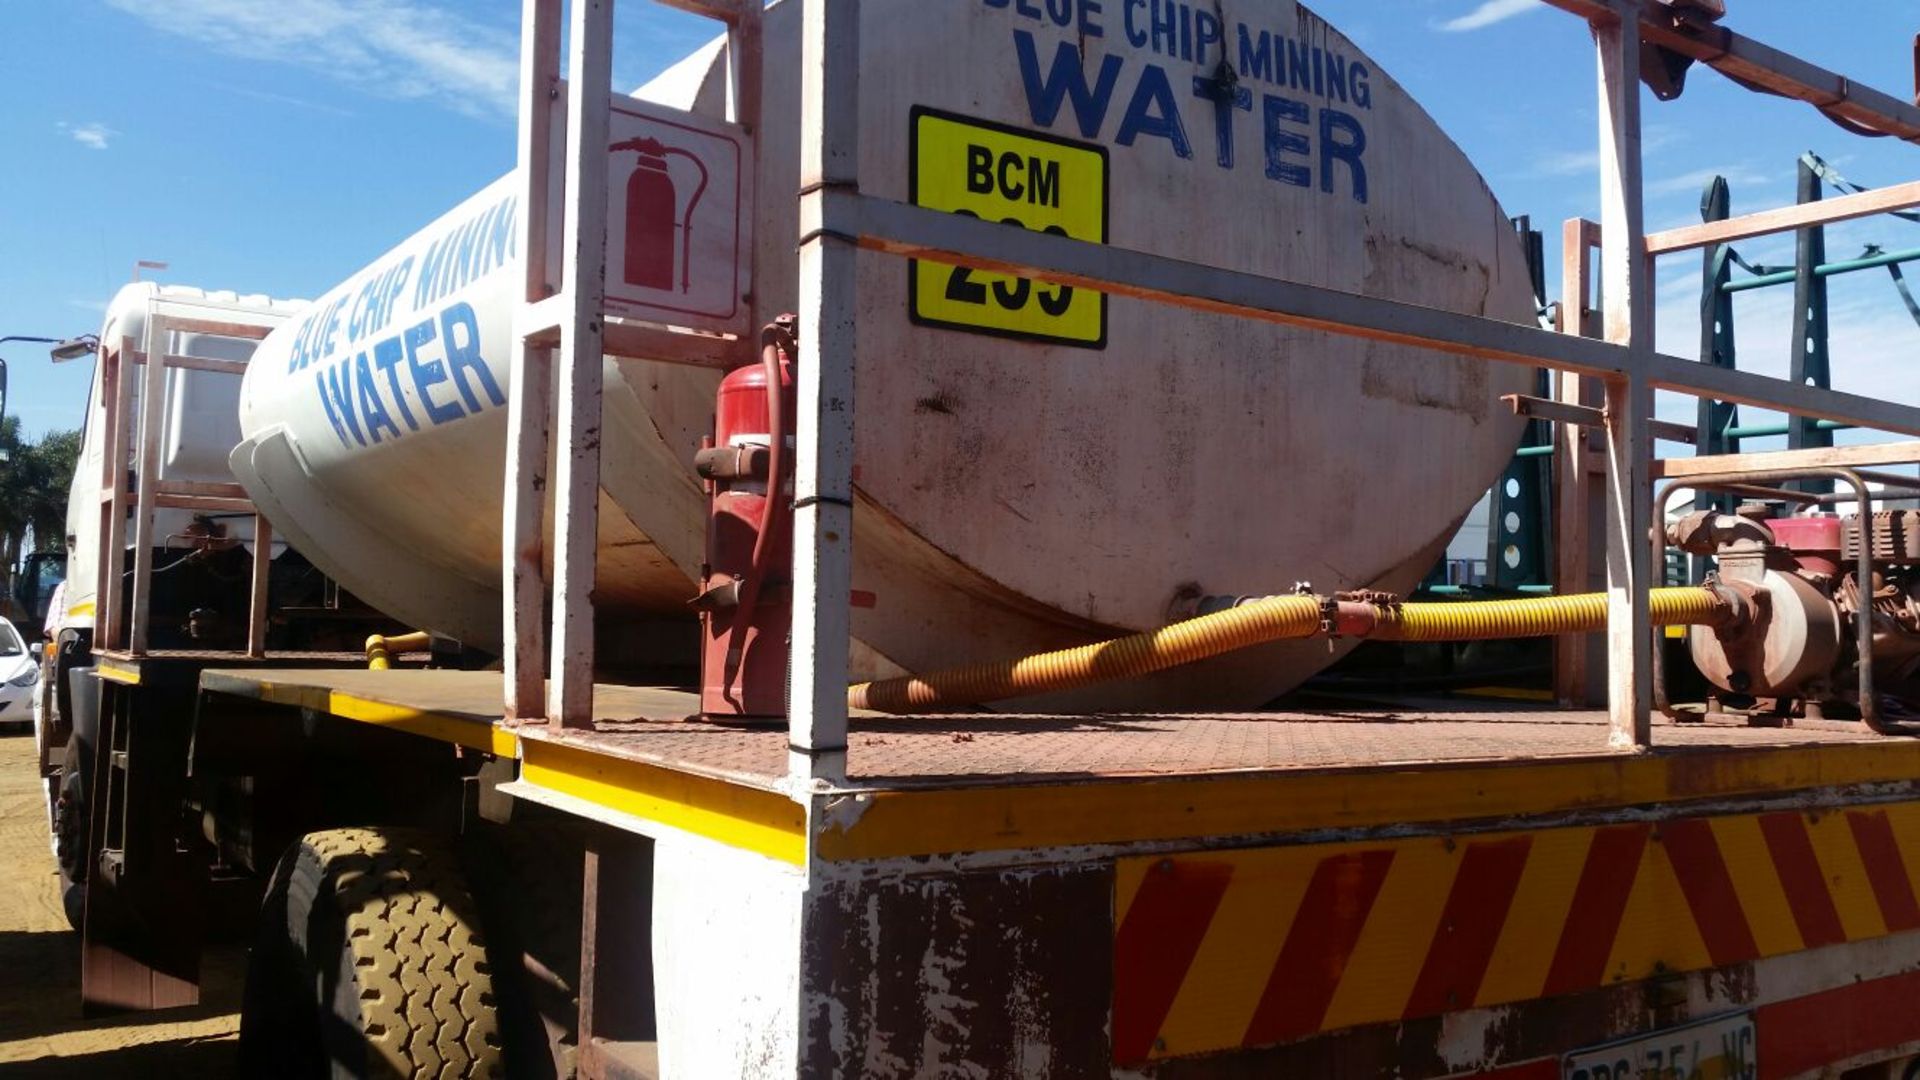 2011 TOYOTA HINO 500 1322 4X4 6,000L WATER TANKER - (CDG354NC) - Image 3 of 3